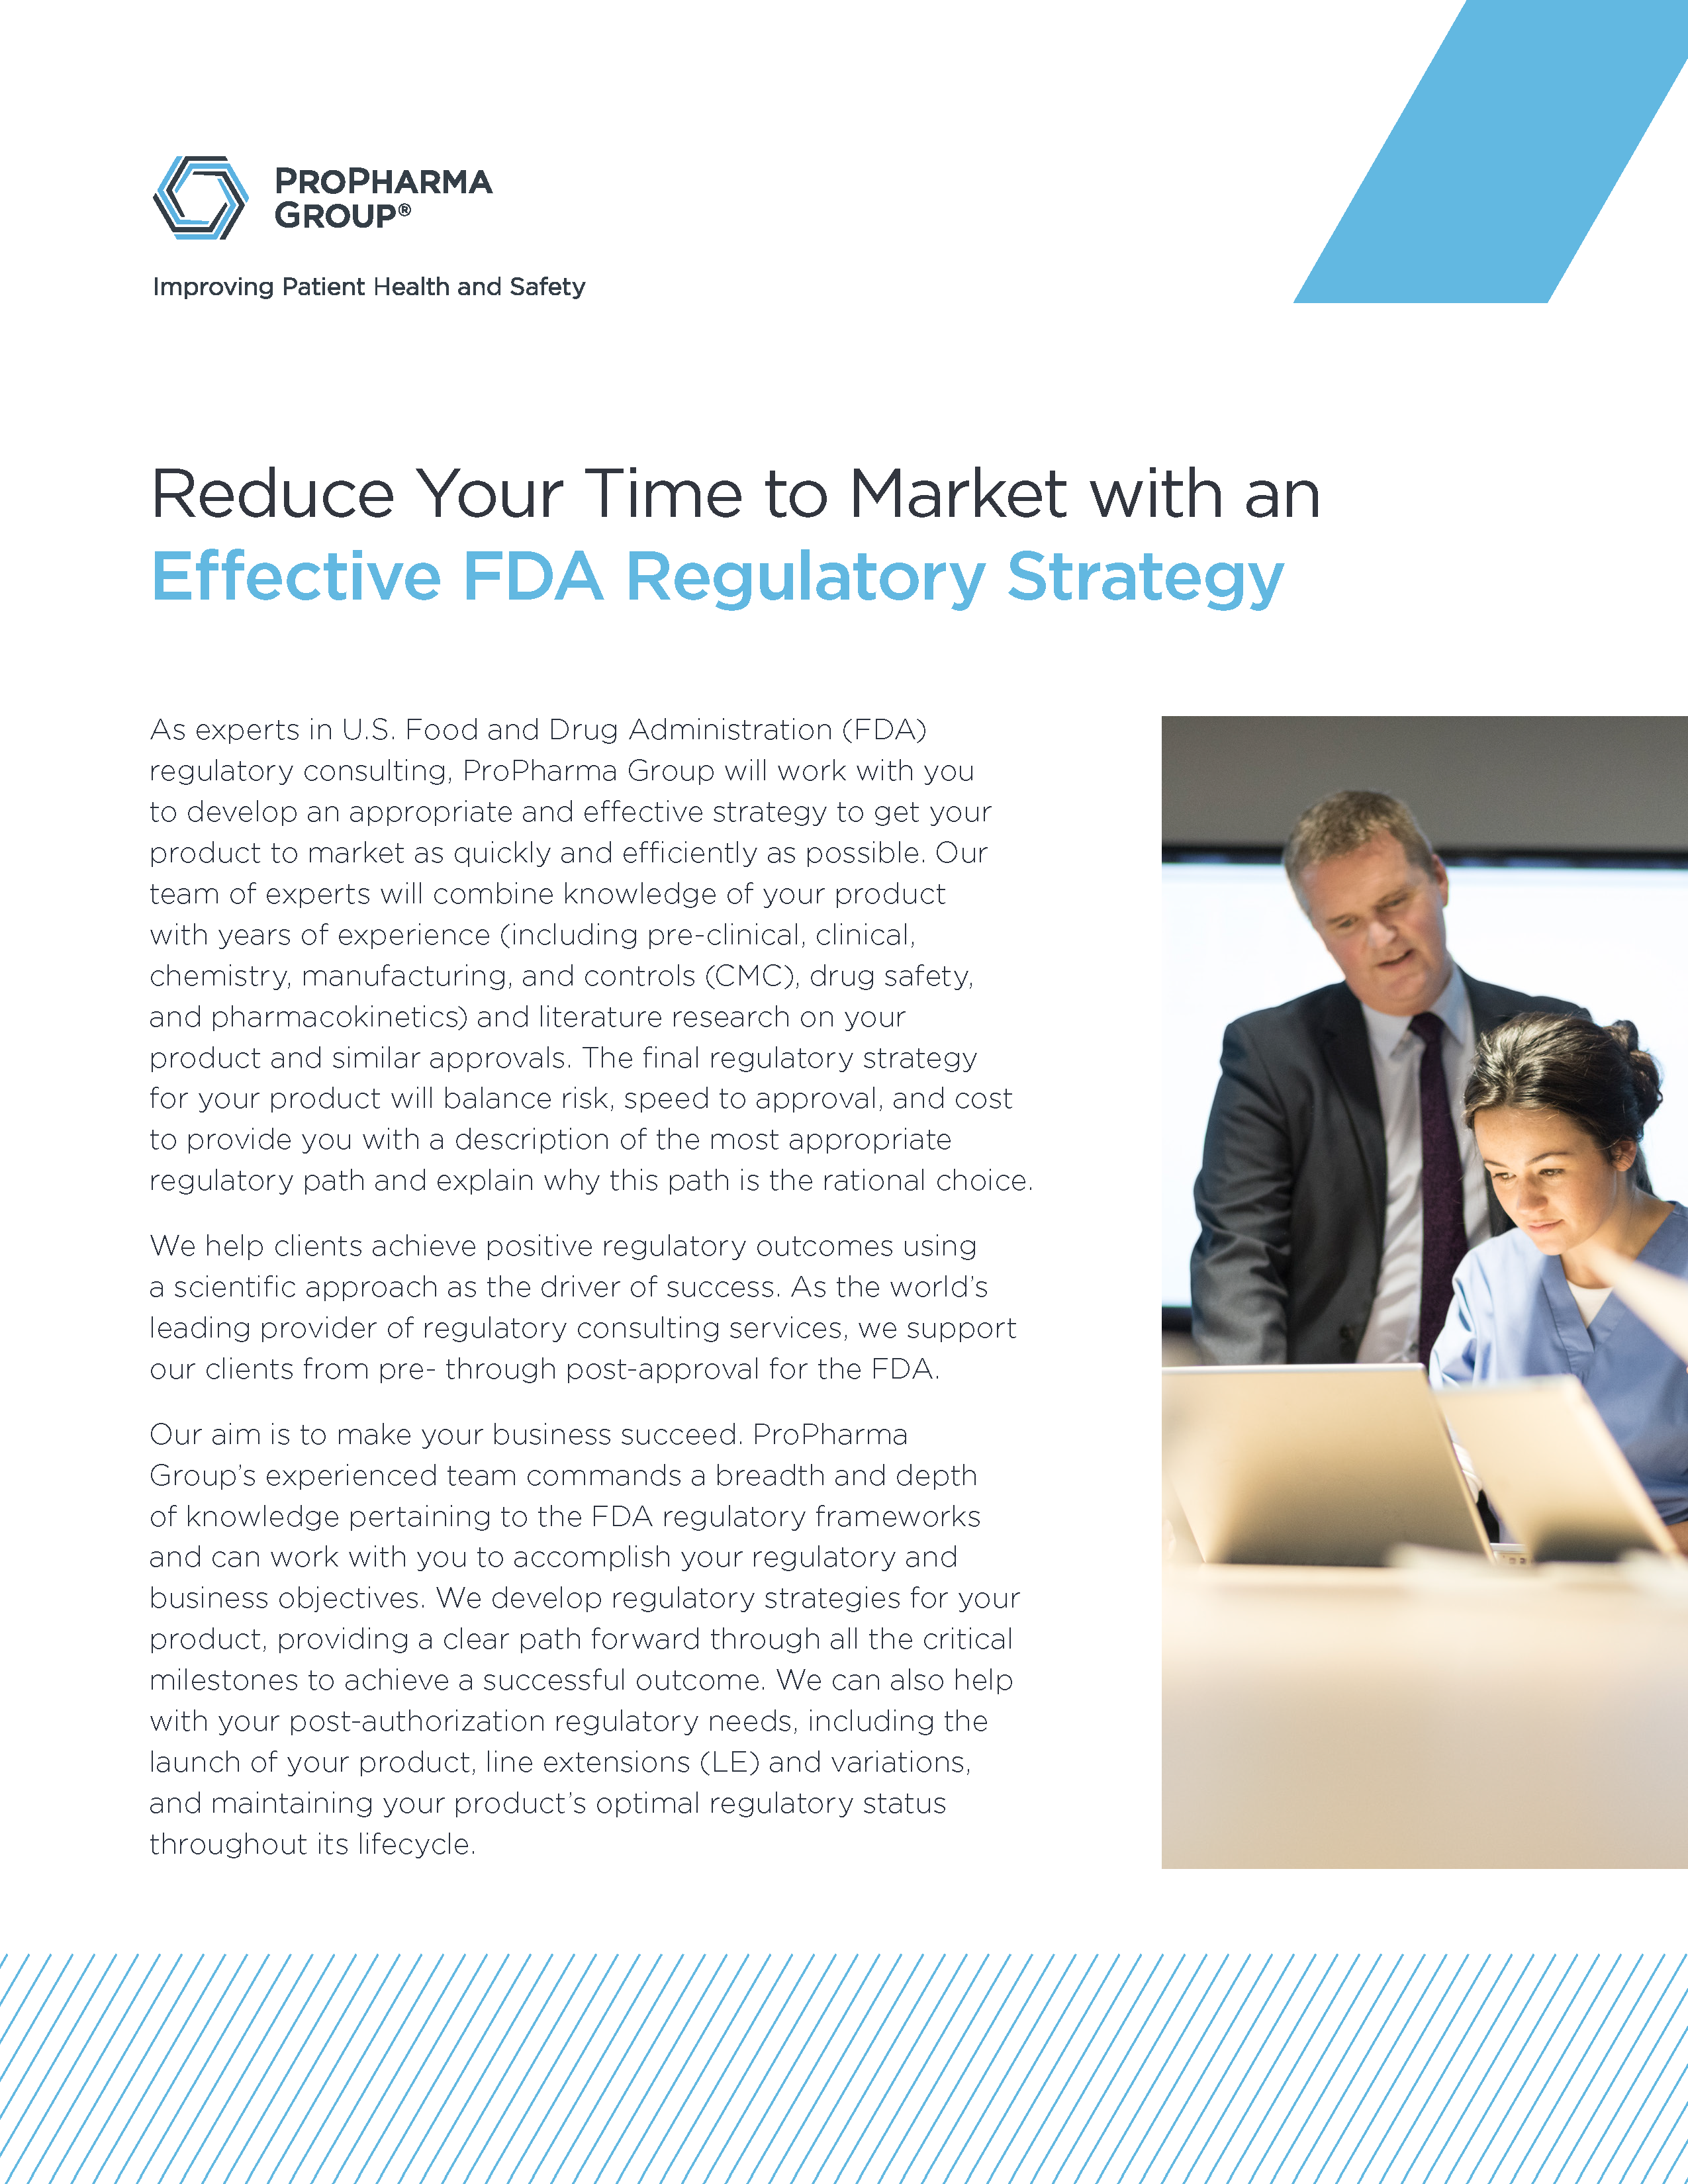 FDA Consulting: Regulatory Strategy Expertise